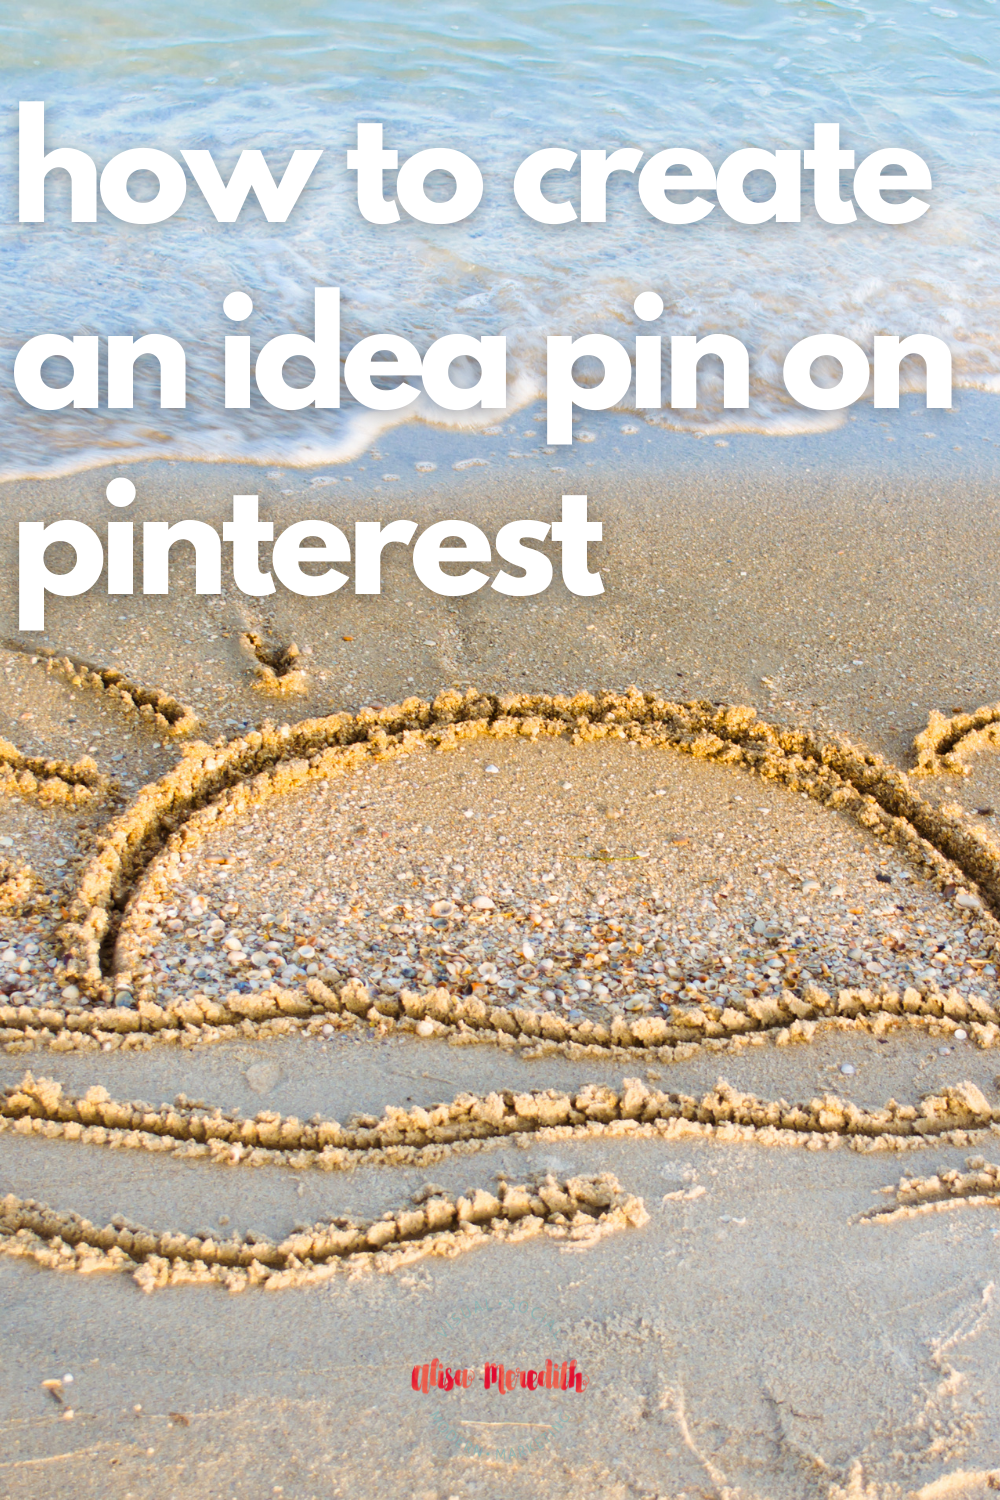 background shows a sun drawn in the beach sand and the shoreline about to reach it. caption - how to create an idea pin on pinterest